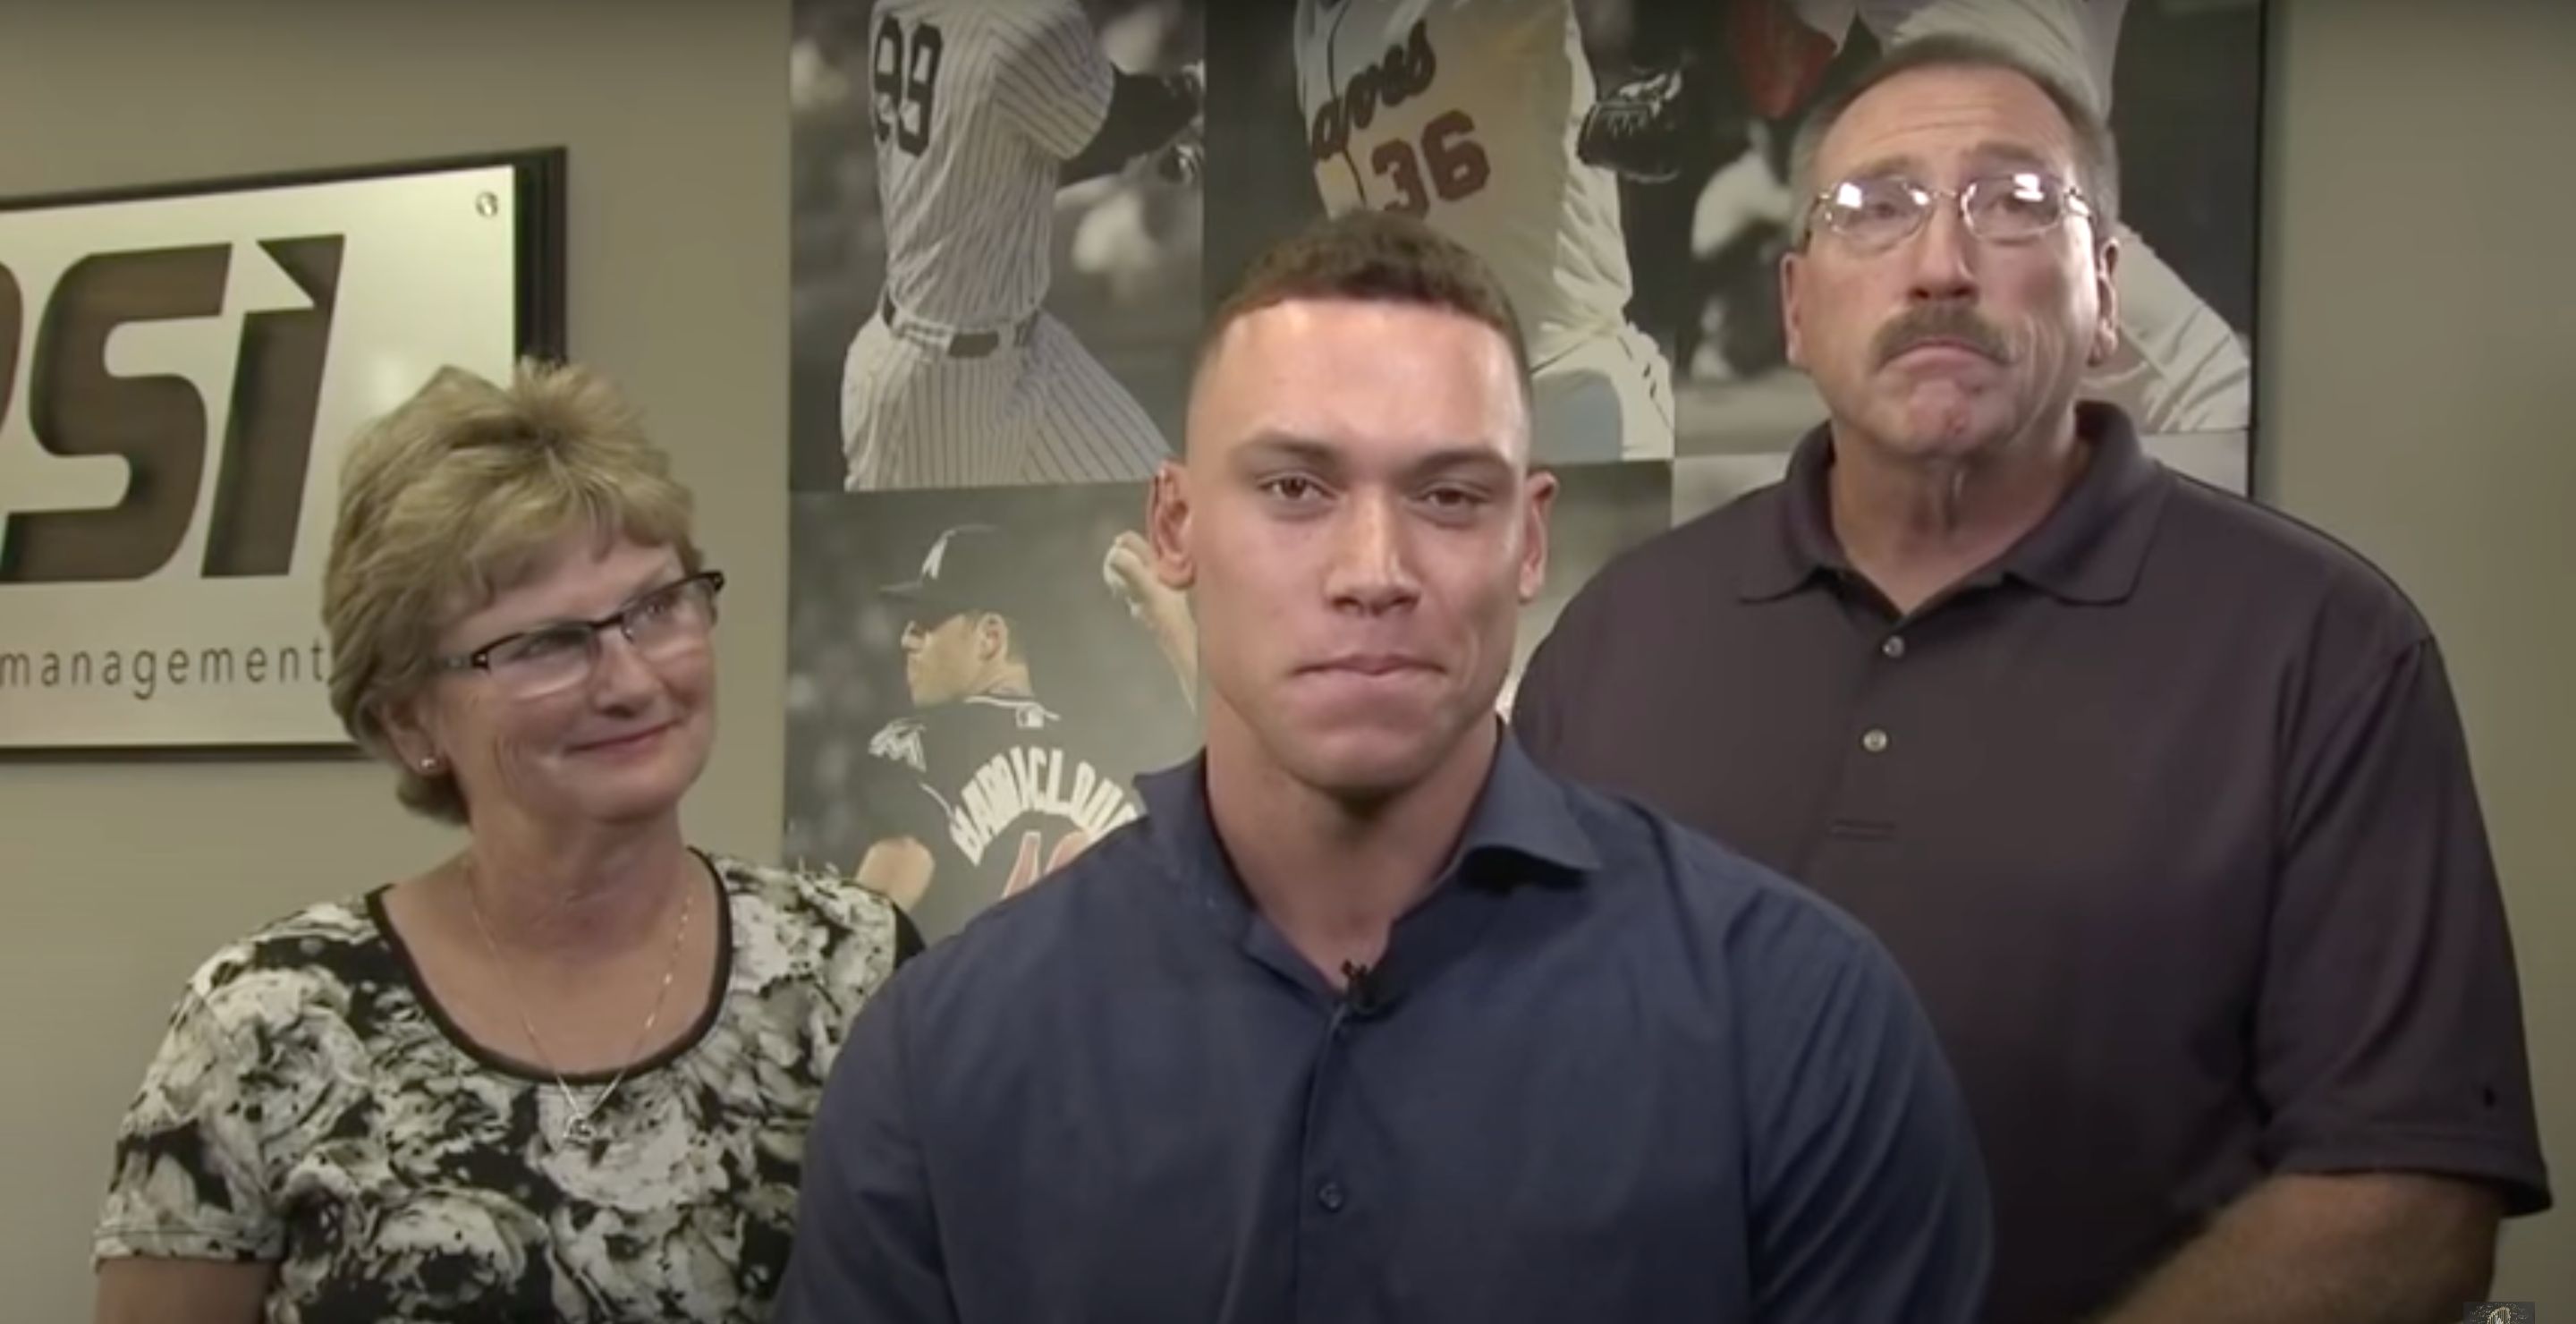 Aaron Judge meme with side-eye look is all over Twitter